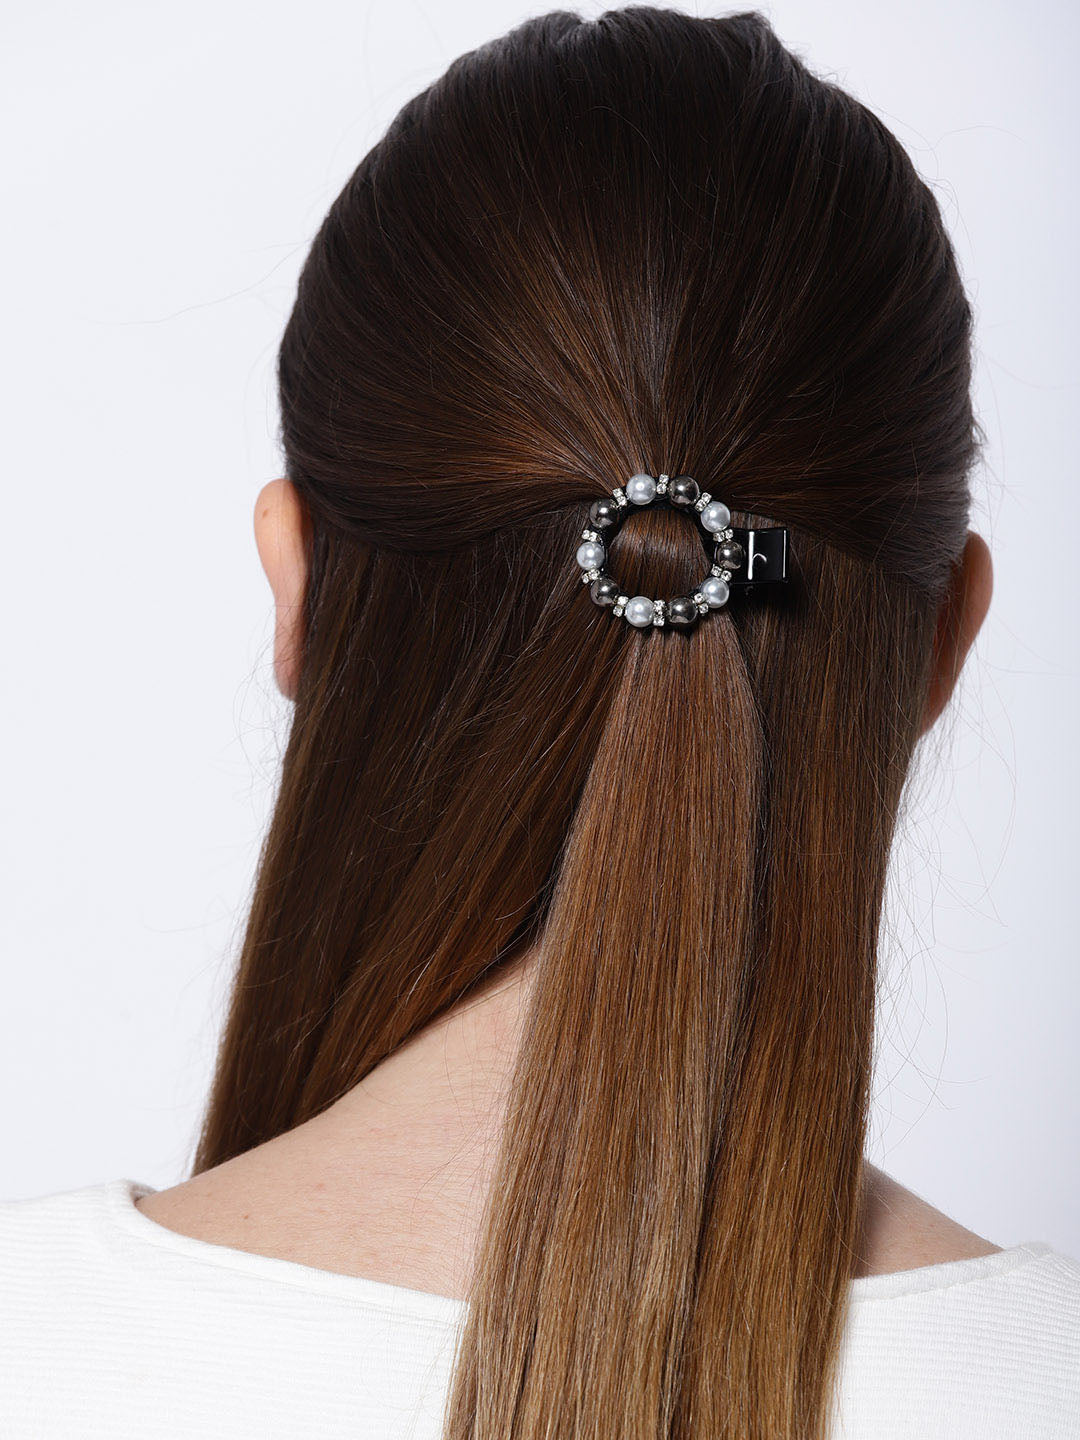 Pearls Embellished Alligator Hair Clip in Black and White Color